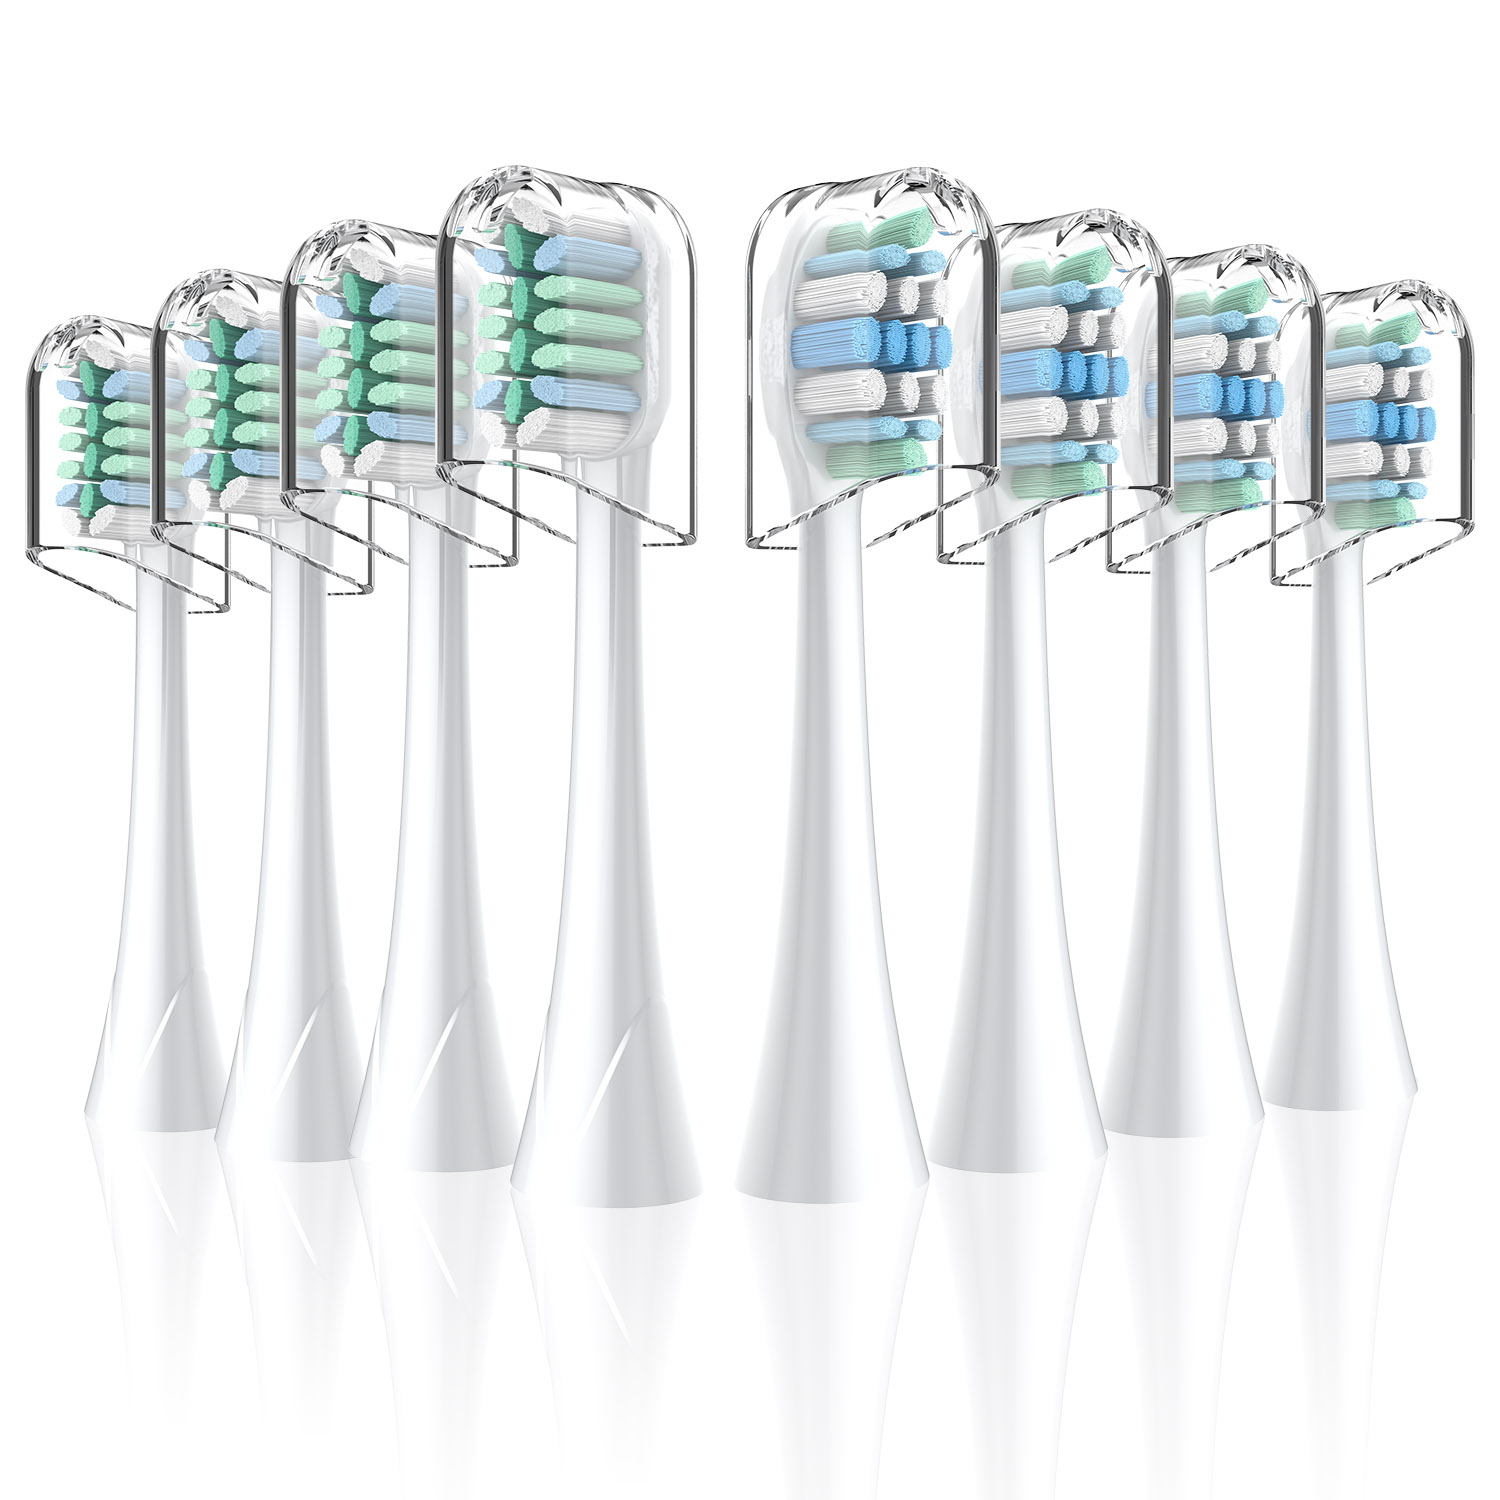 Tikola Phillips Electric Toothbrush Replacement Heads 8 Pack RRP 12.99 CLEARANCE XL 9.99